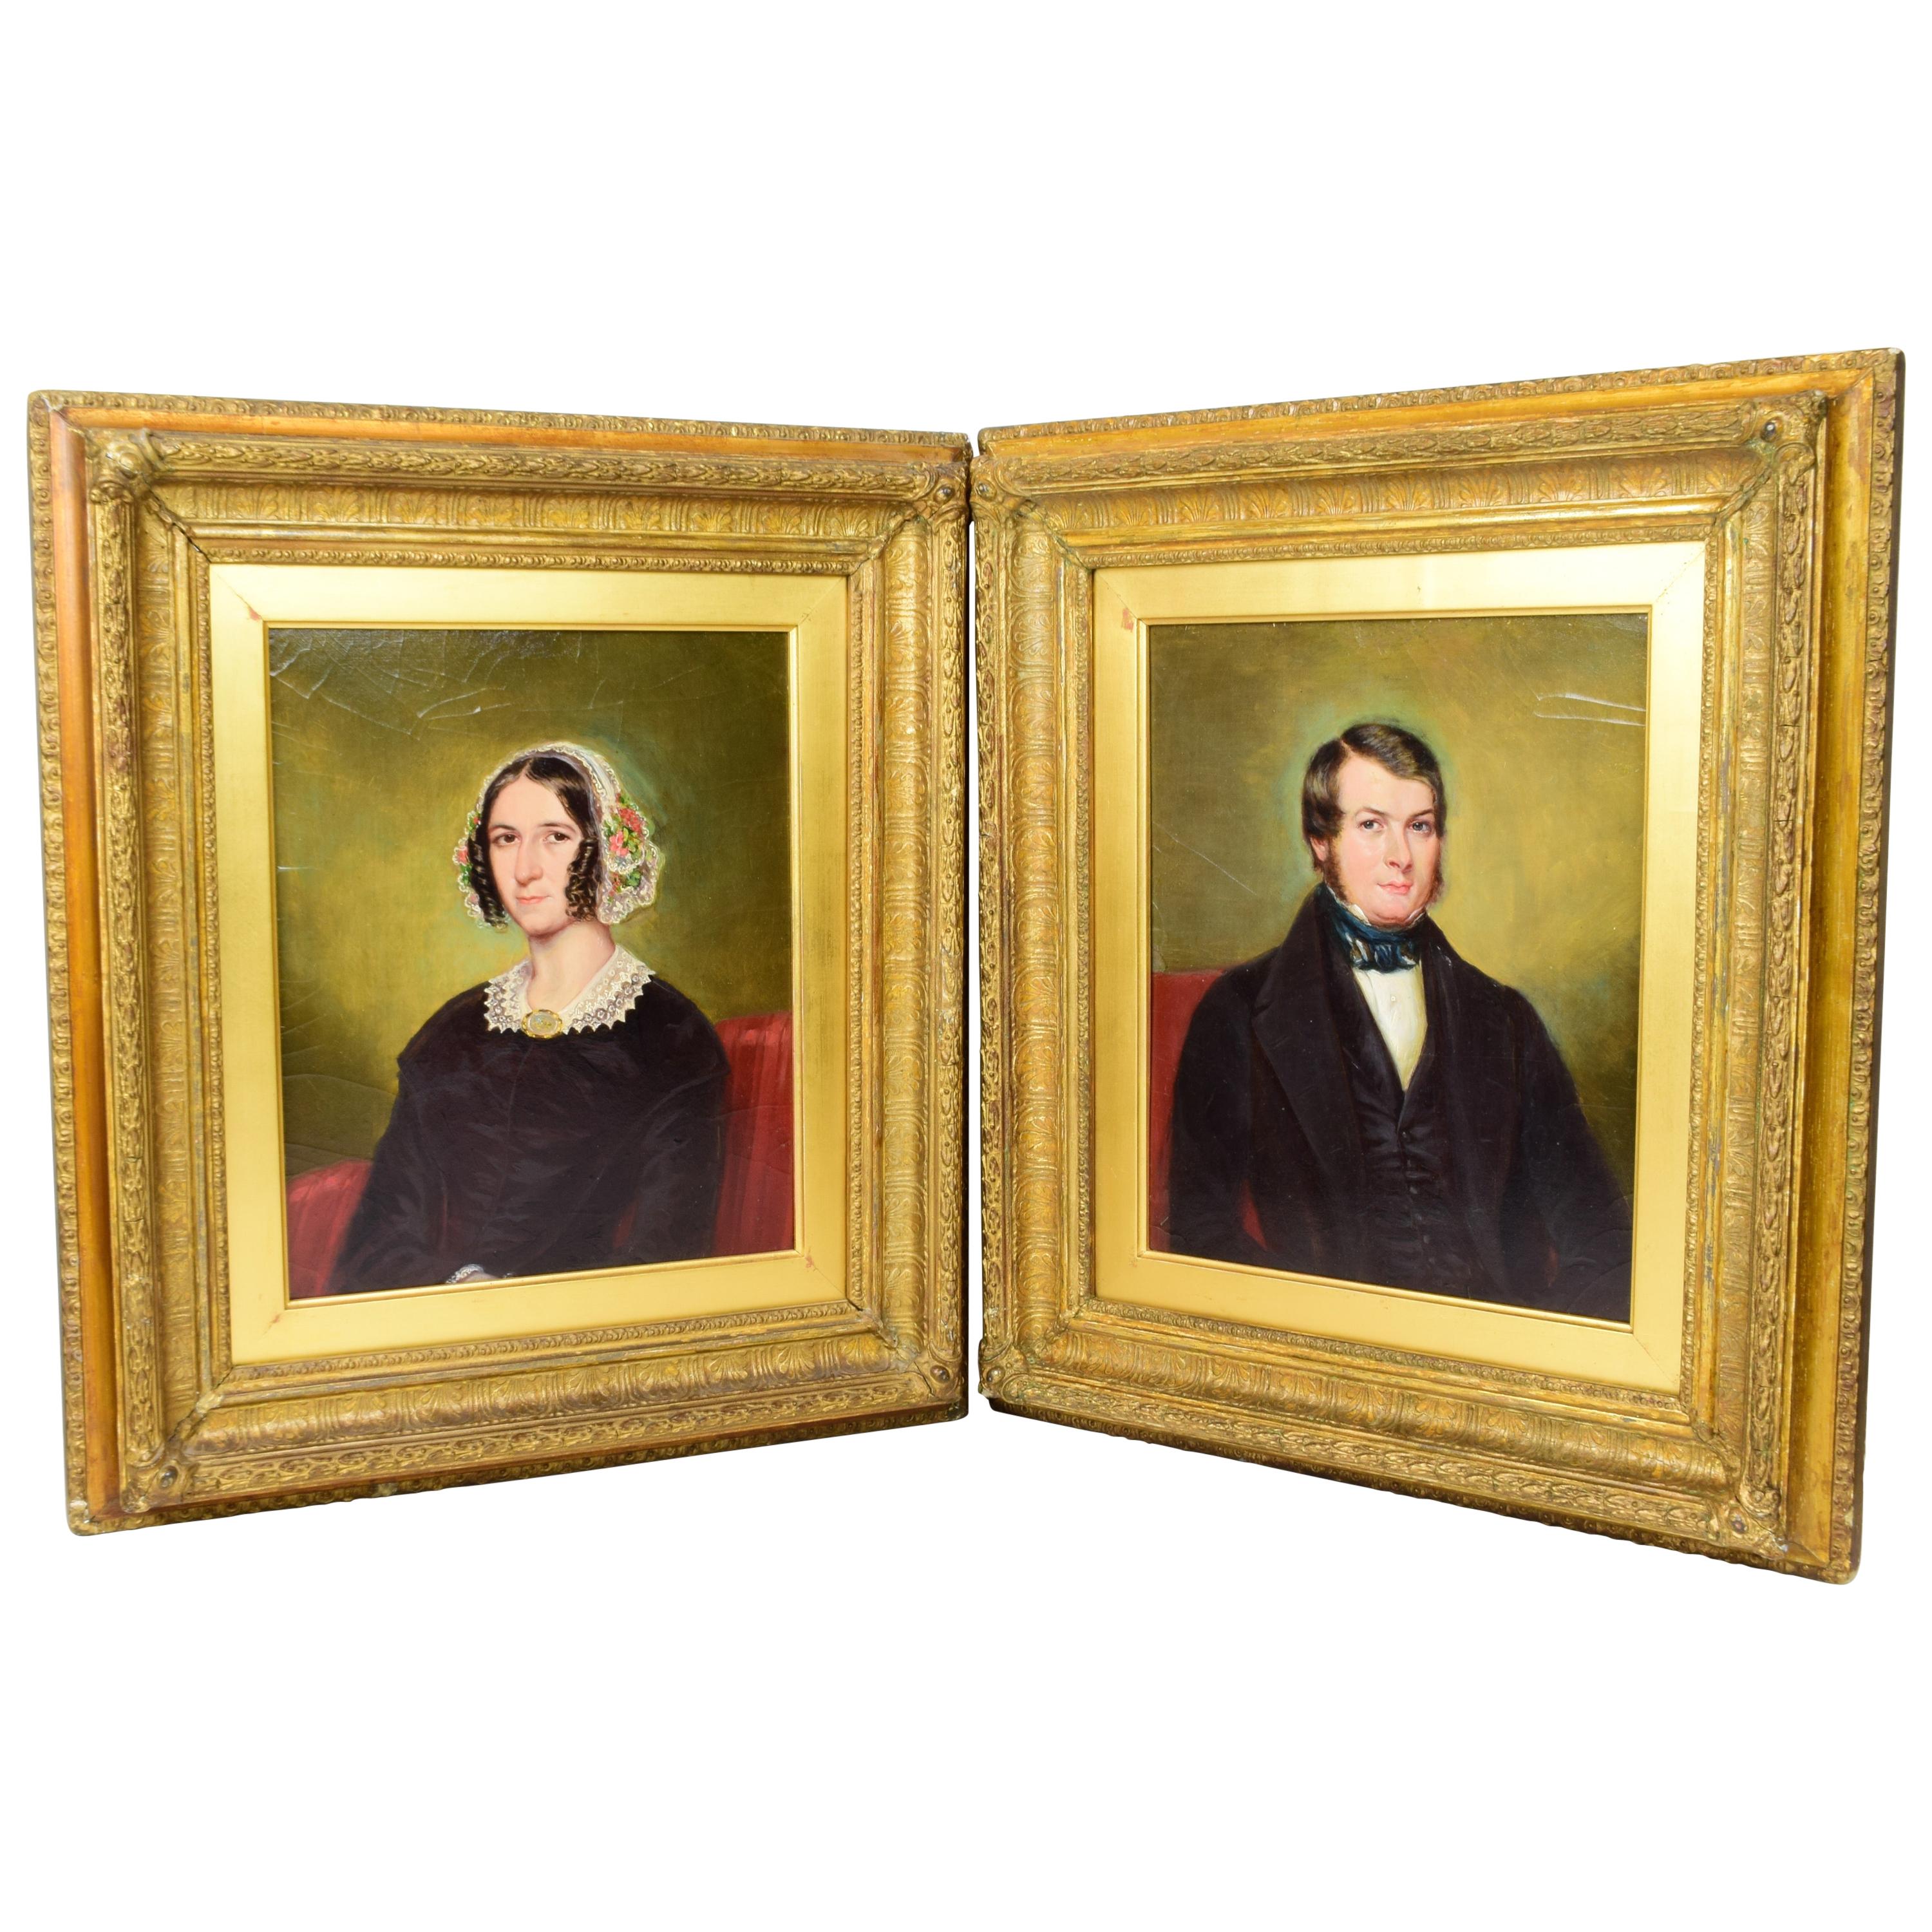 Pair of Portraits Oil on Cardboard Mid 19th Century Victorian with Gilded Frames